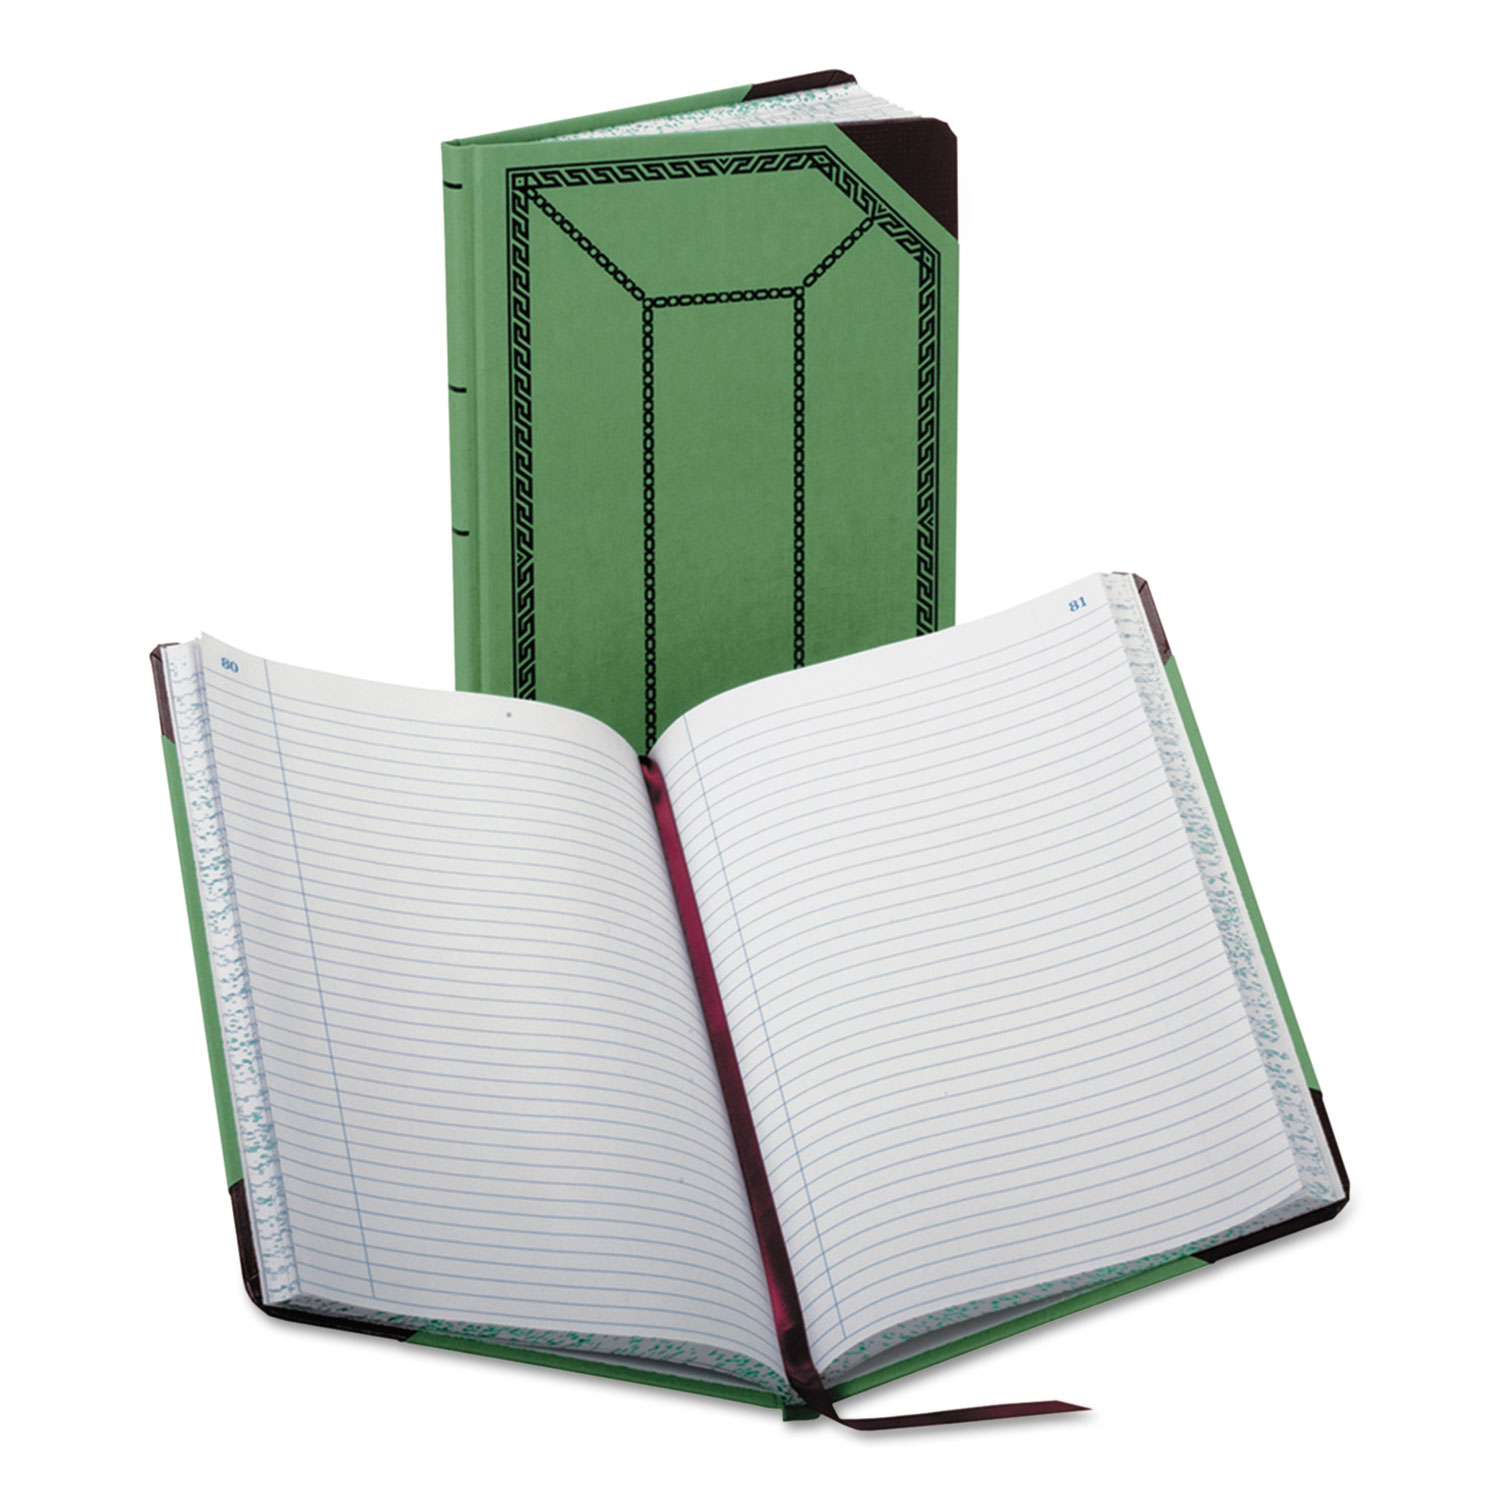  Boorum & Pease 67 1/8-150-R Record/Account Book, Record Rule, Green/Red, 150 Pages, 12 1/2 x 7 5/8 (BOR6718150R) 